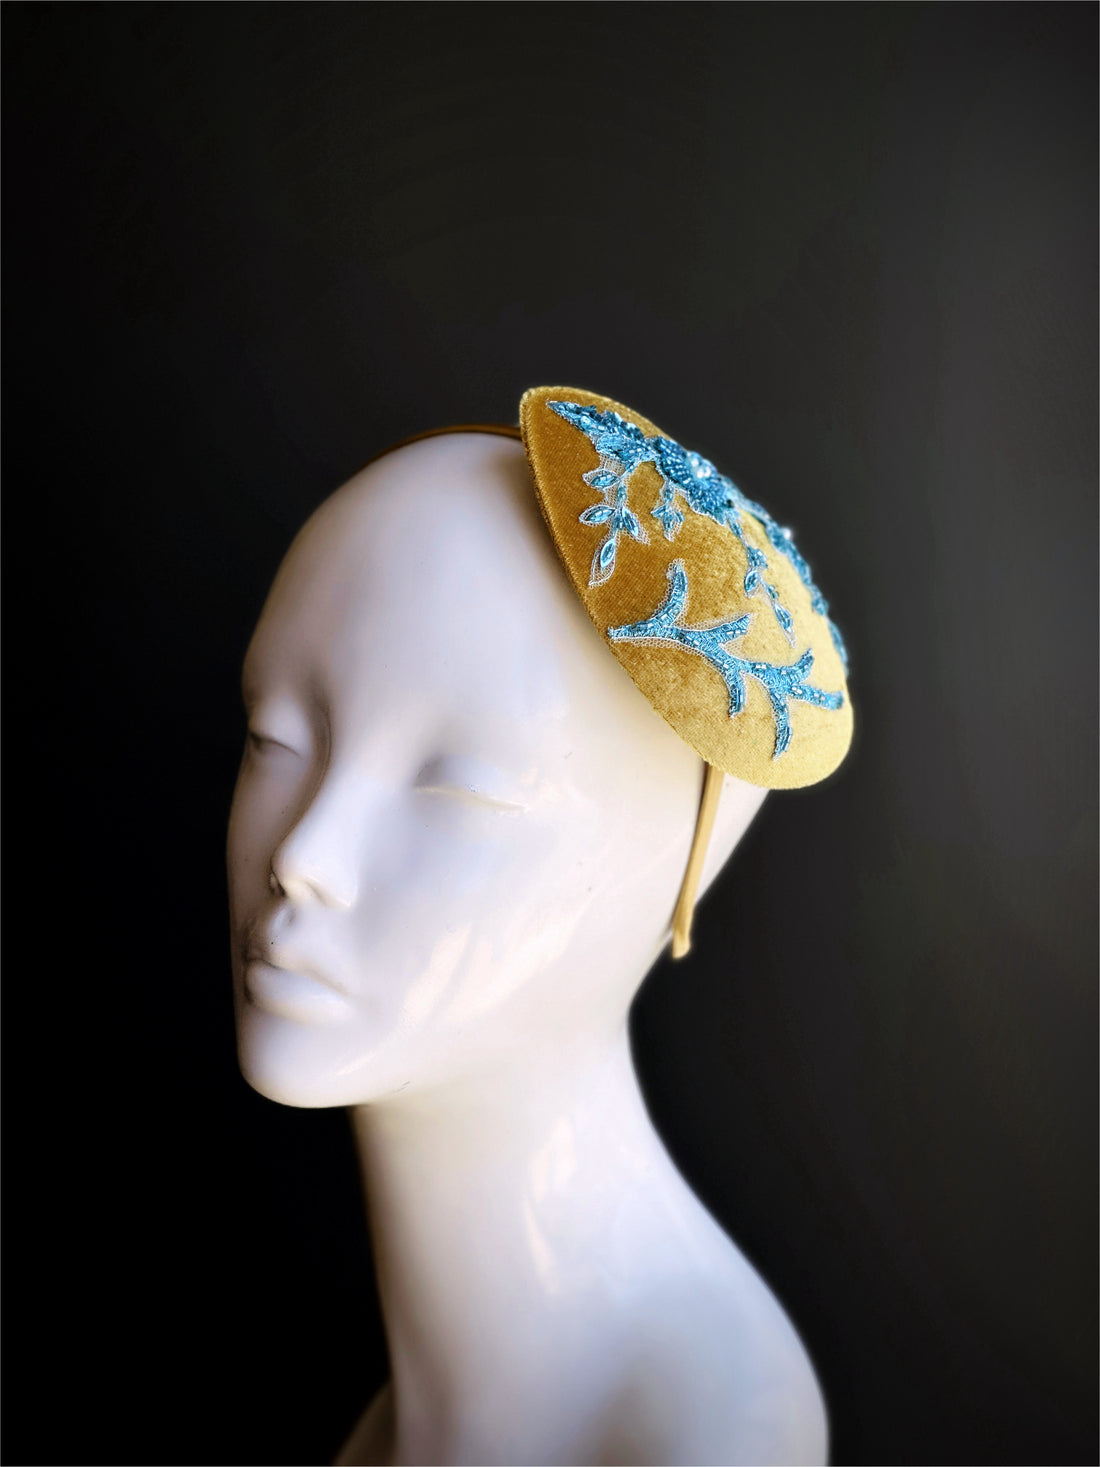 Velvet teardrop shaped fascinator in gold with blue beaded lace design.